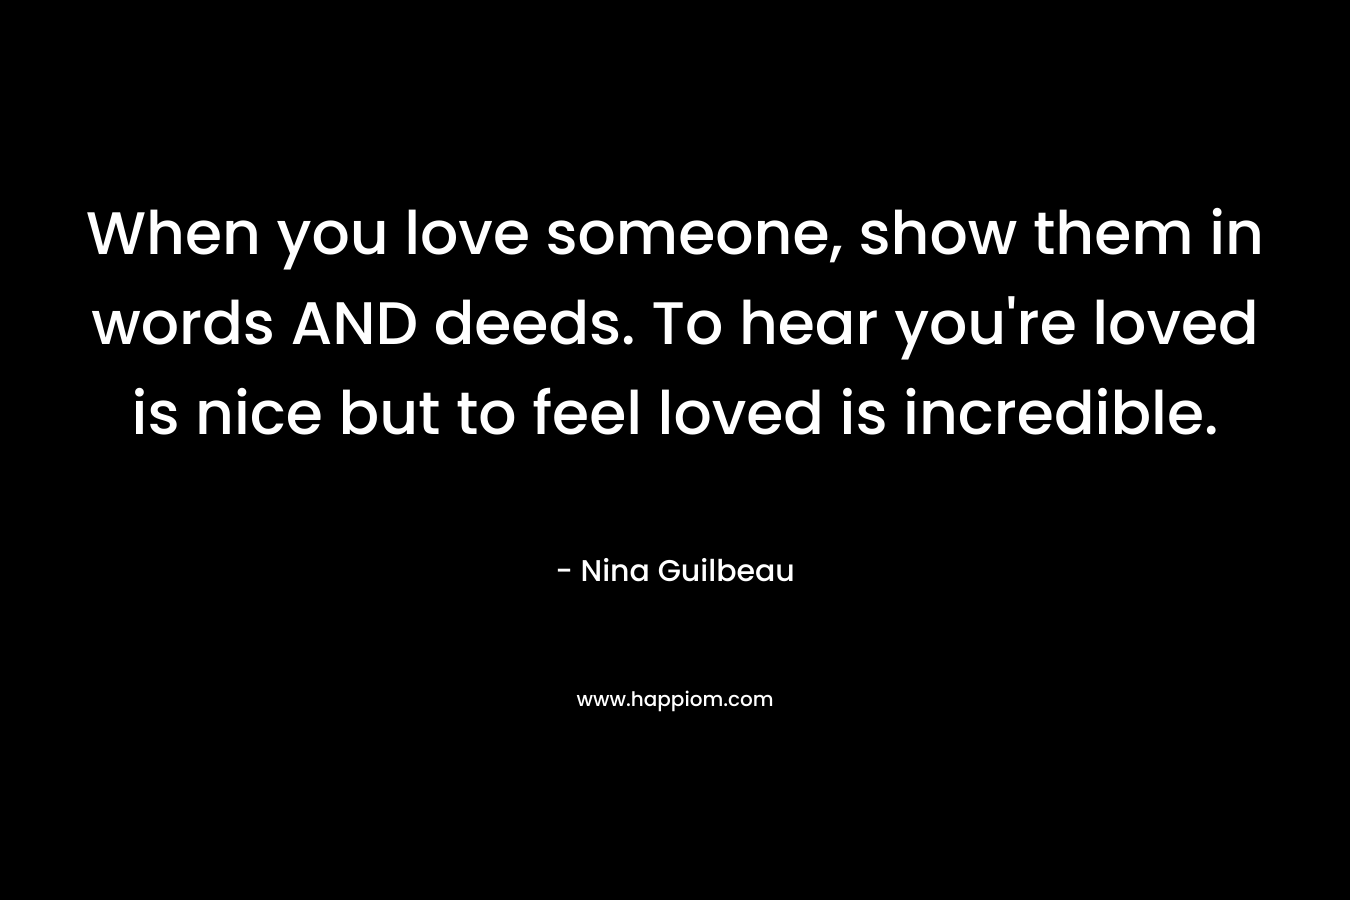 When you love someone, show them in words AND deeds. To hear you're loved is nice but to feel loved is incredible.